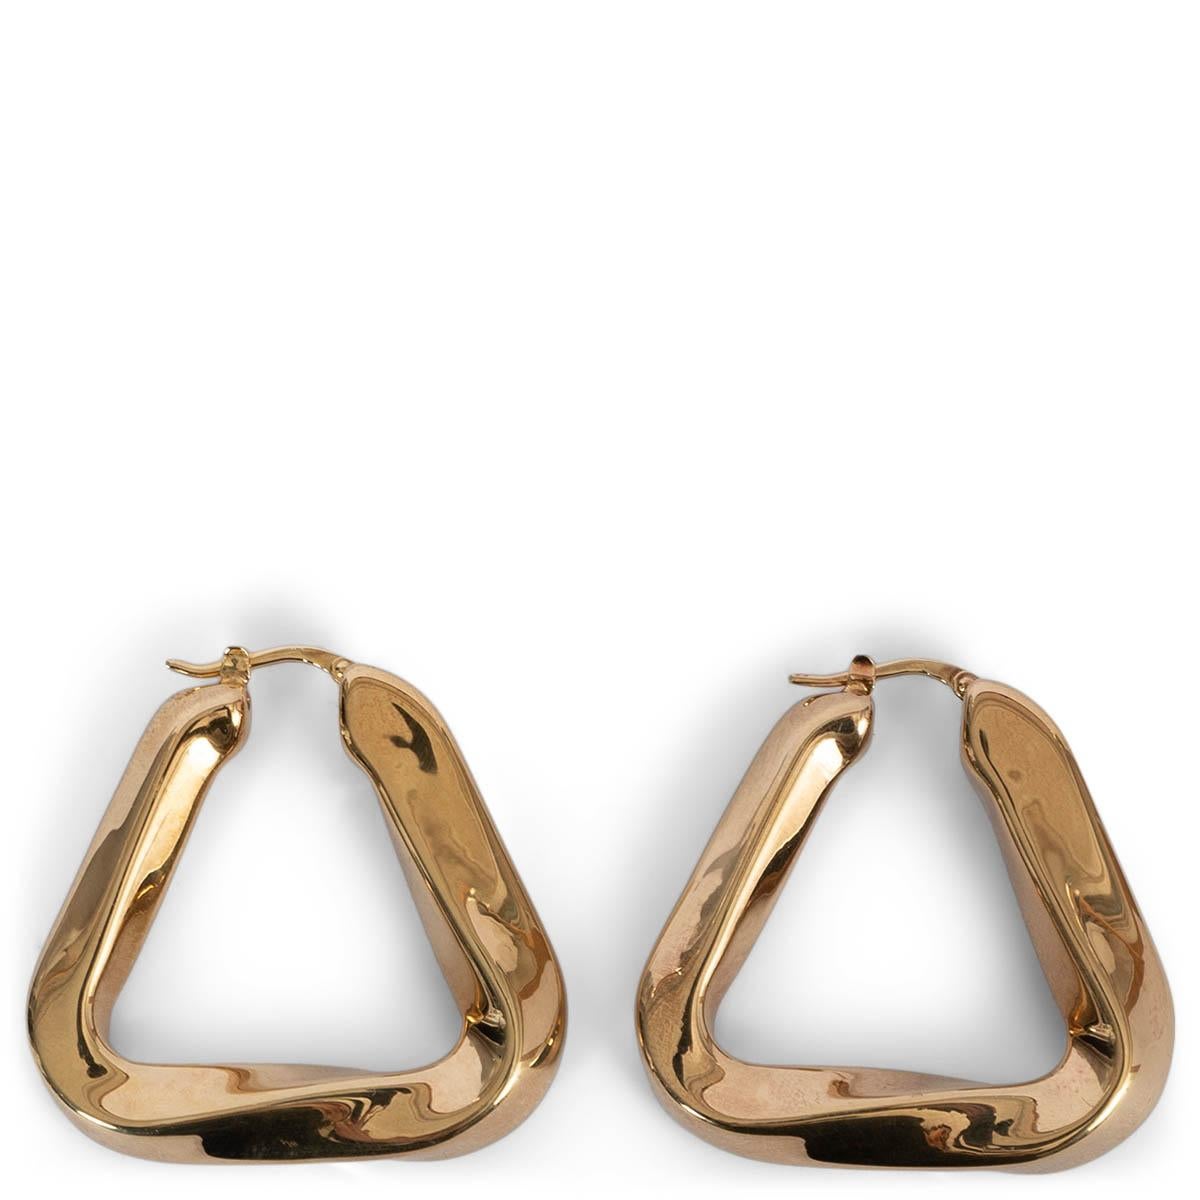 100% authentic Bottega Veneta Essentials Twisted Triangle hoop earrings in gold-plated sterling silver. Post fasting for pierced ears. Have been worn and are in excellent condition. Come with dust bag. 

Measurements
Width	3.5cm (1.4in)
Length	3.5cm